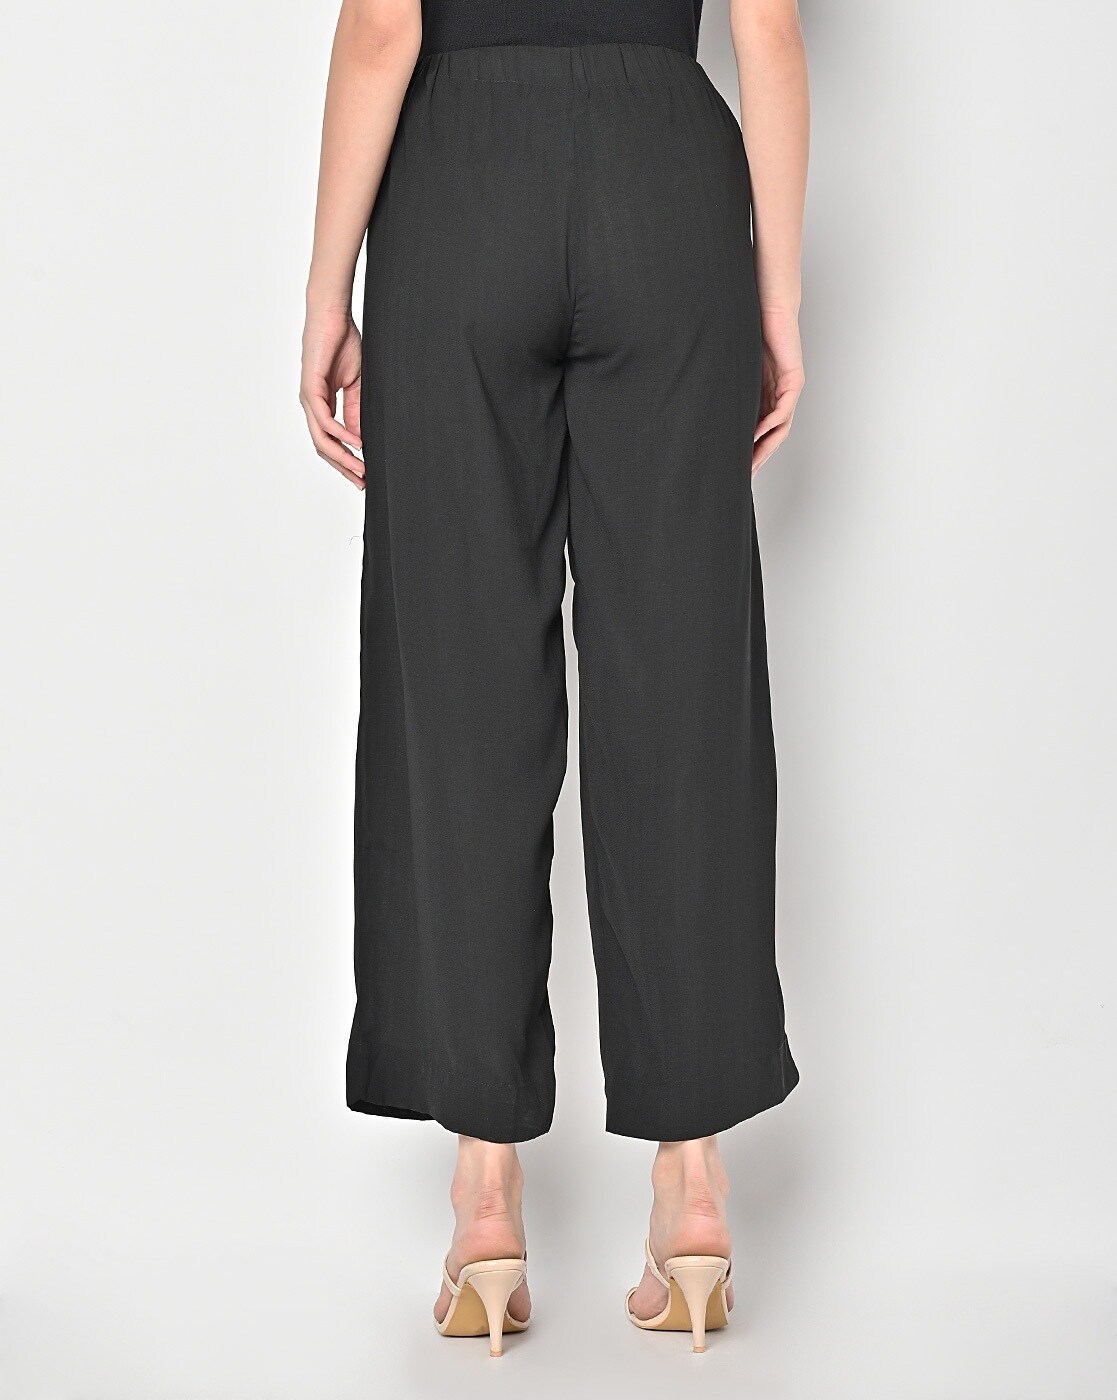 Buy ALLEN SOLLY Womens 2 Pocket Solid Formal Trousers  Shoppers Stop